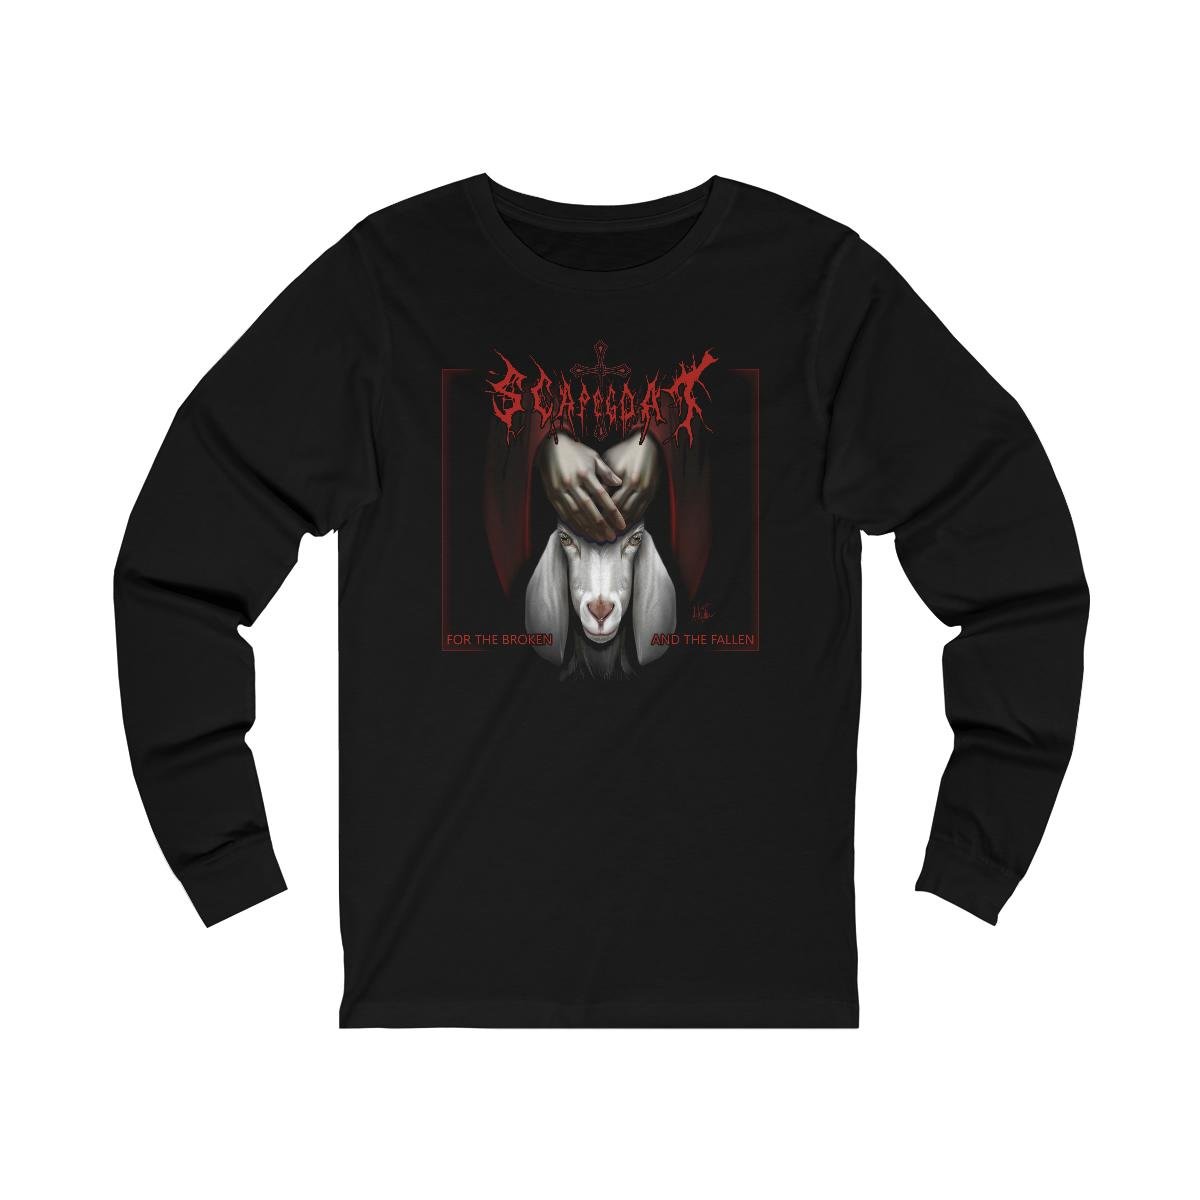 Scapegoat – For The Broken And The Fallen Long Sleeve Tshirt